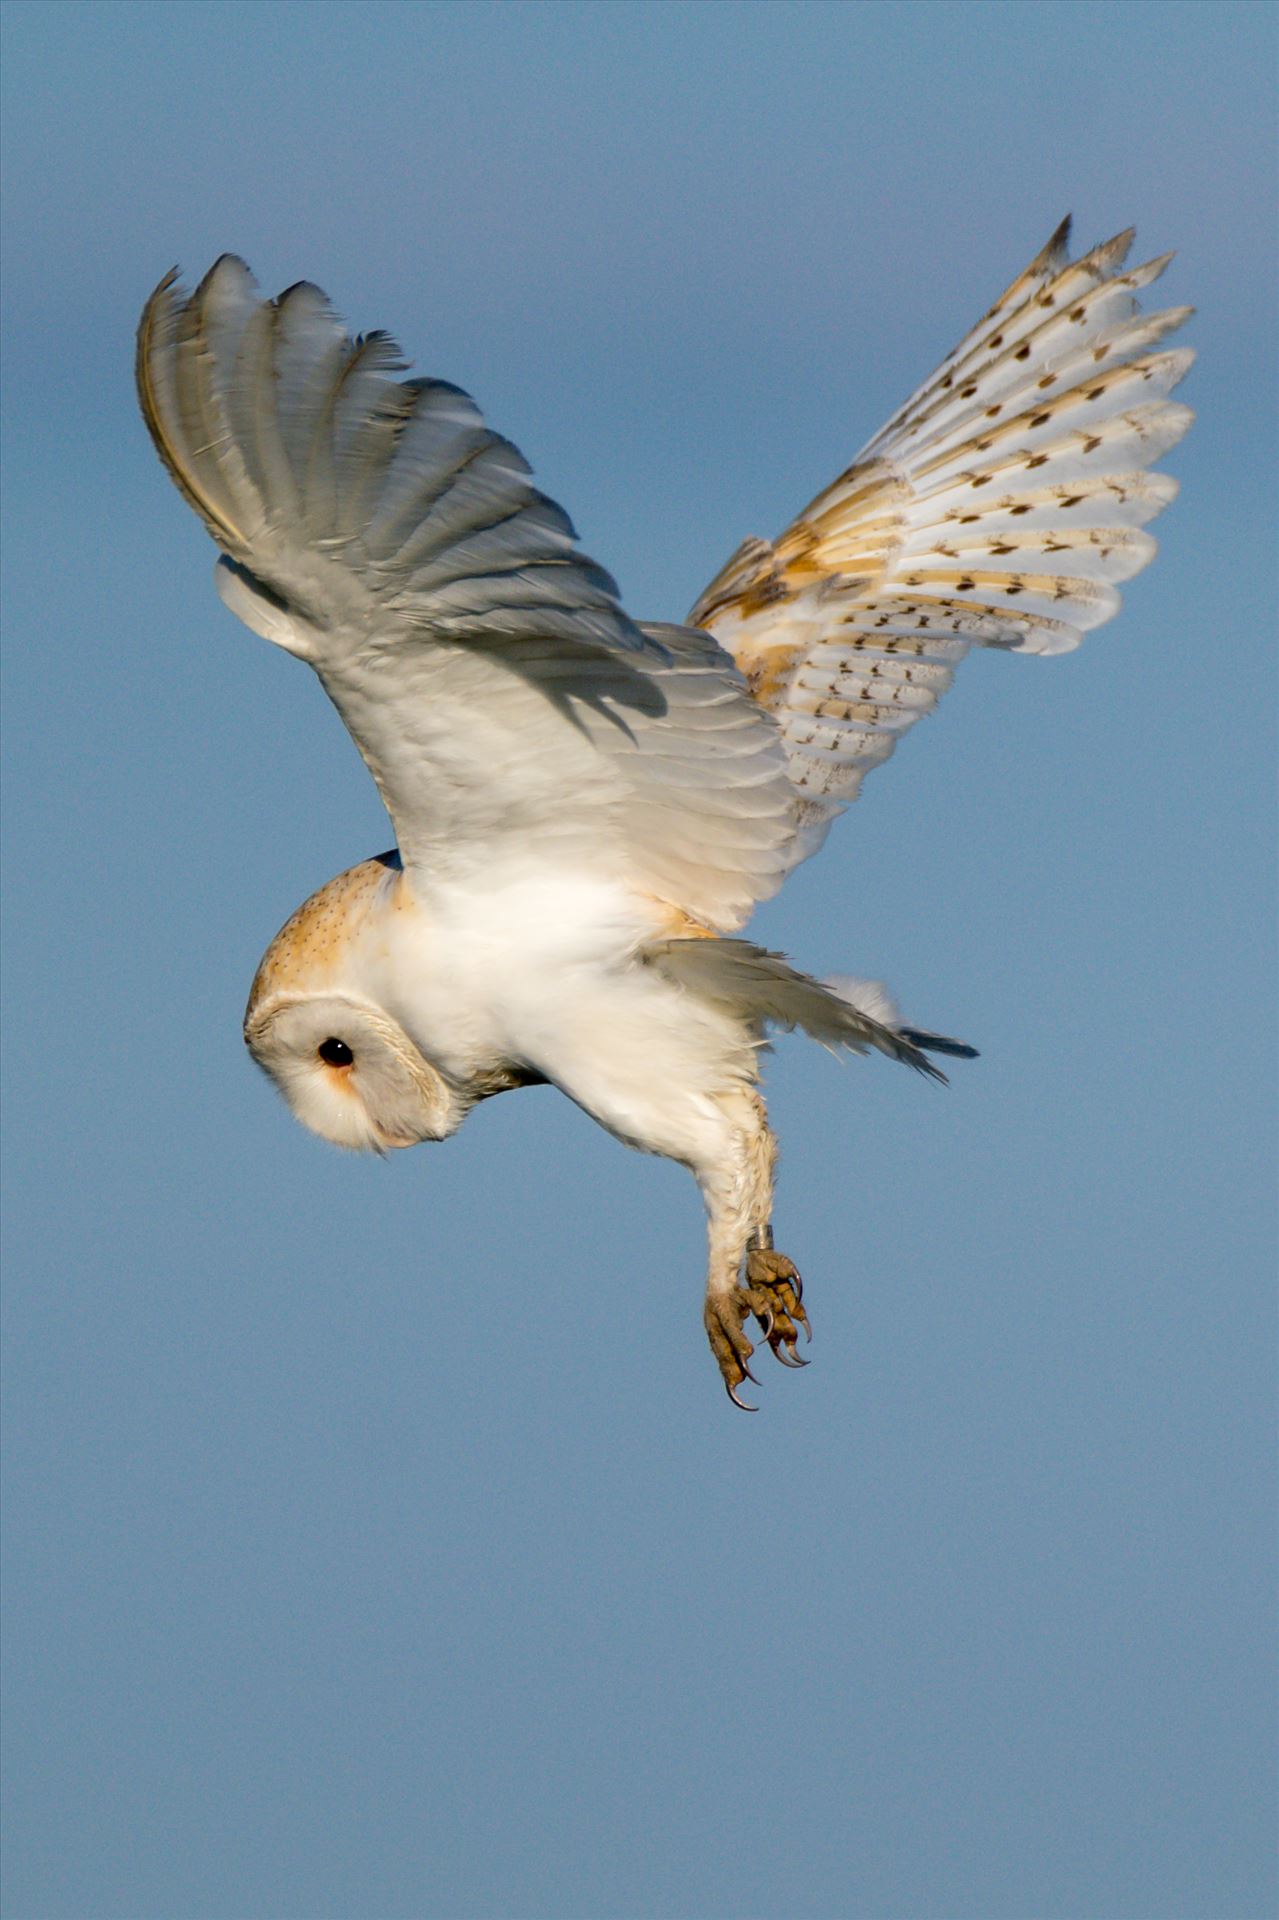 Barn Owl on the hunt 02 A Barn Owl on the hunt for its breakfast by AJ Stoves Photography